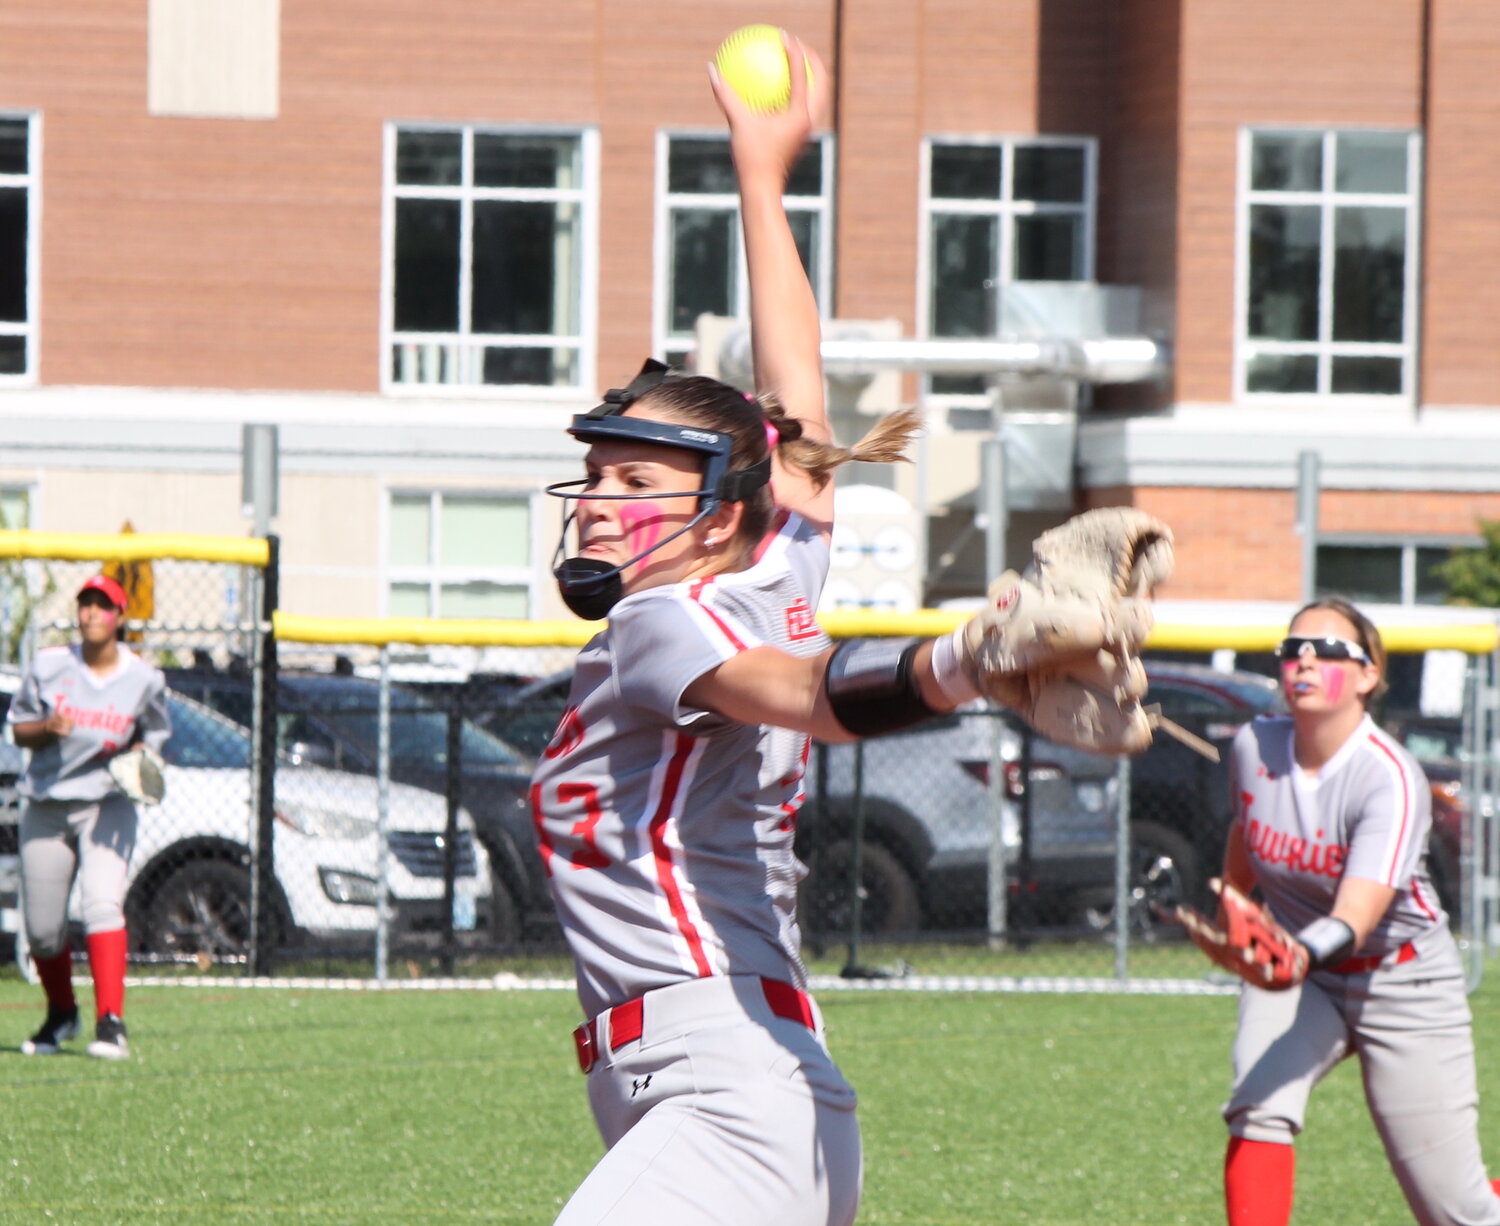 Keira Quadros struck out 10 batters in the Townies' 1-0 season-ending loss to Cumberland in the 2023 Division I playoffs.